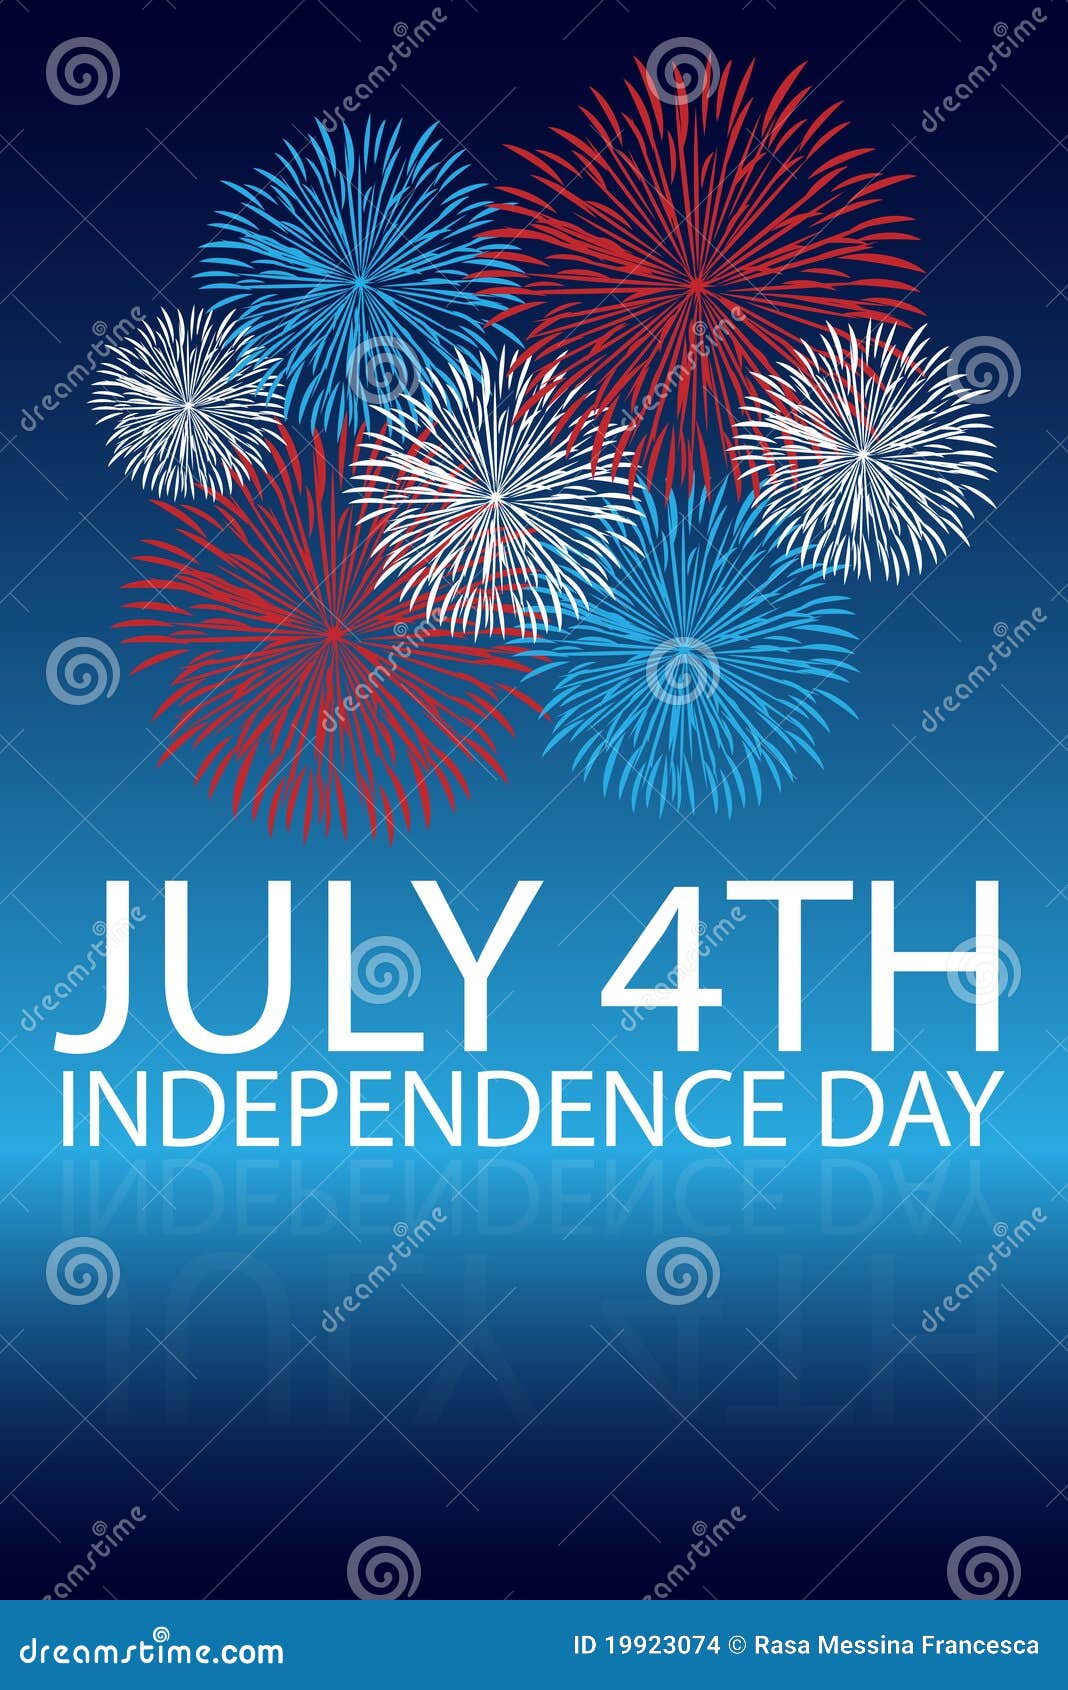 independence day background